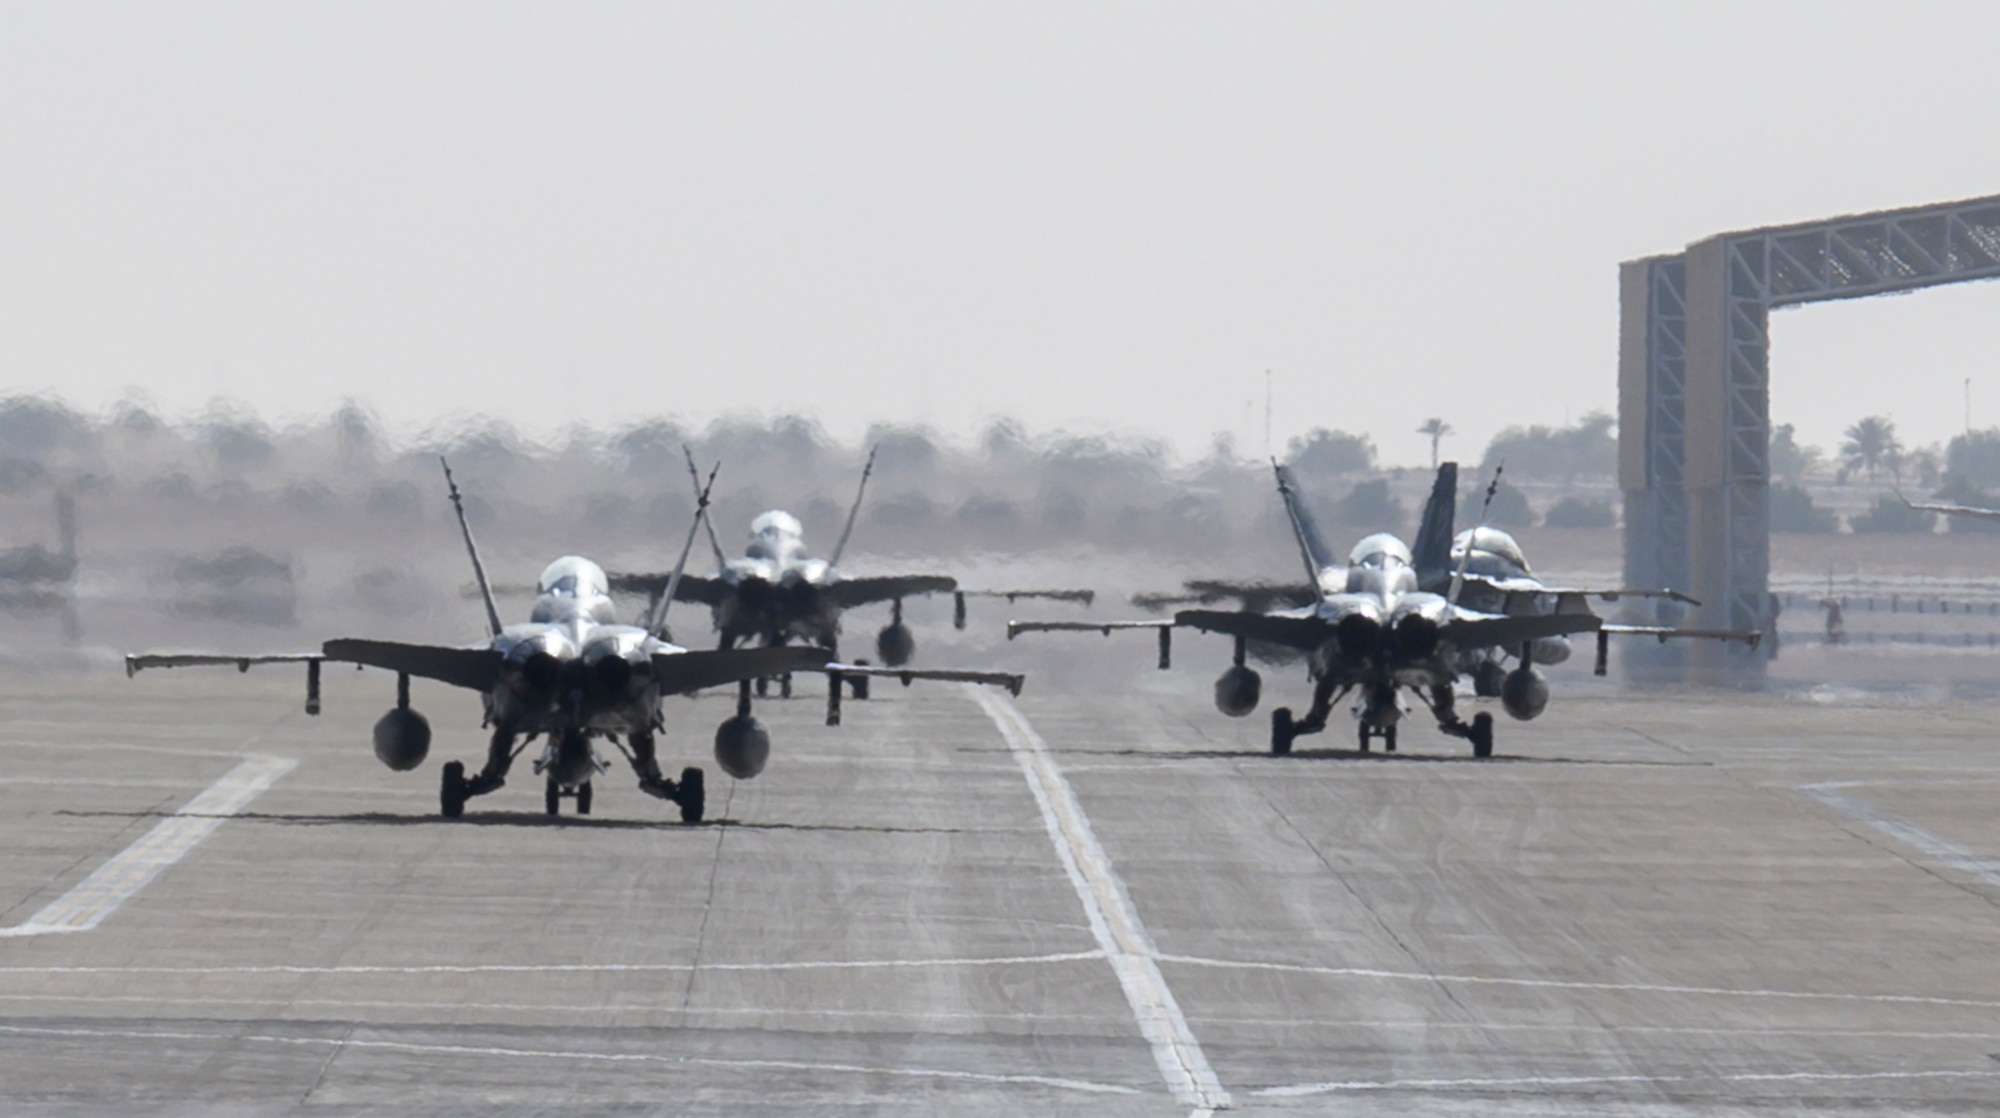 U.S. Marine Corps F/A-18D Hornets taxi to their parking spots at Prince Sultan Air Base, Kingdom of Saudi Arabia, May 8, 2021. A detachment of F/A-18s, along with squadron personnel from Marine Corps Air Station Beaufort, South Carolina, will rapidly integrate into theater training, as well as joint and partnered missions, as part of a dynamic force employment highlighting the U.S. military’s ability to rapidly deploy and employ forces anywhere around the globe.  (U.S. Air Force photo by Senior Airman Samuel Earick)